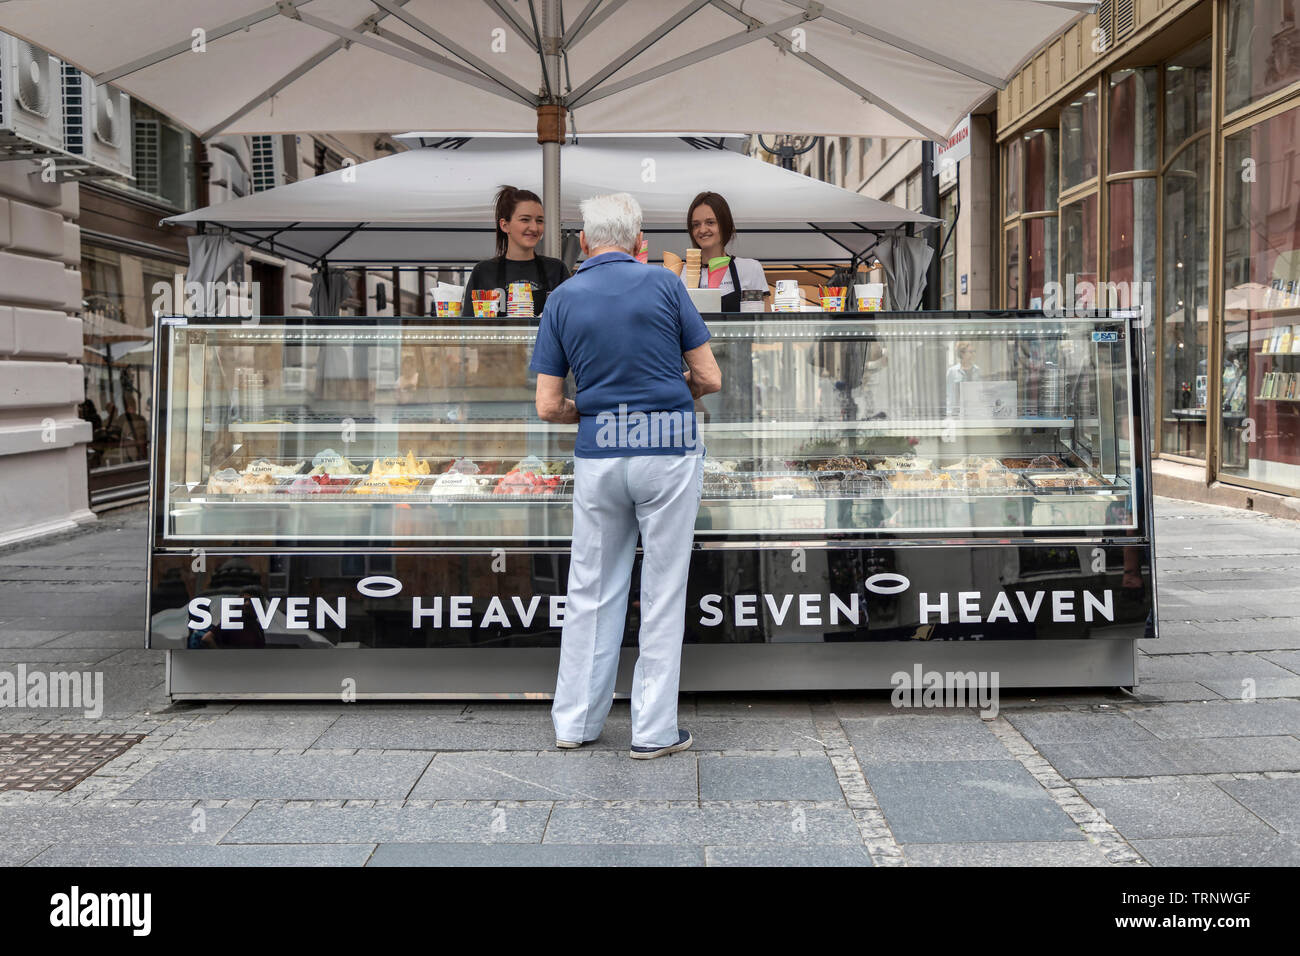 Belgrade, Serbia, June 6th 2019: Man buying from an ice cream stand at Knez Mihailova Street Stock Photo